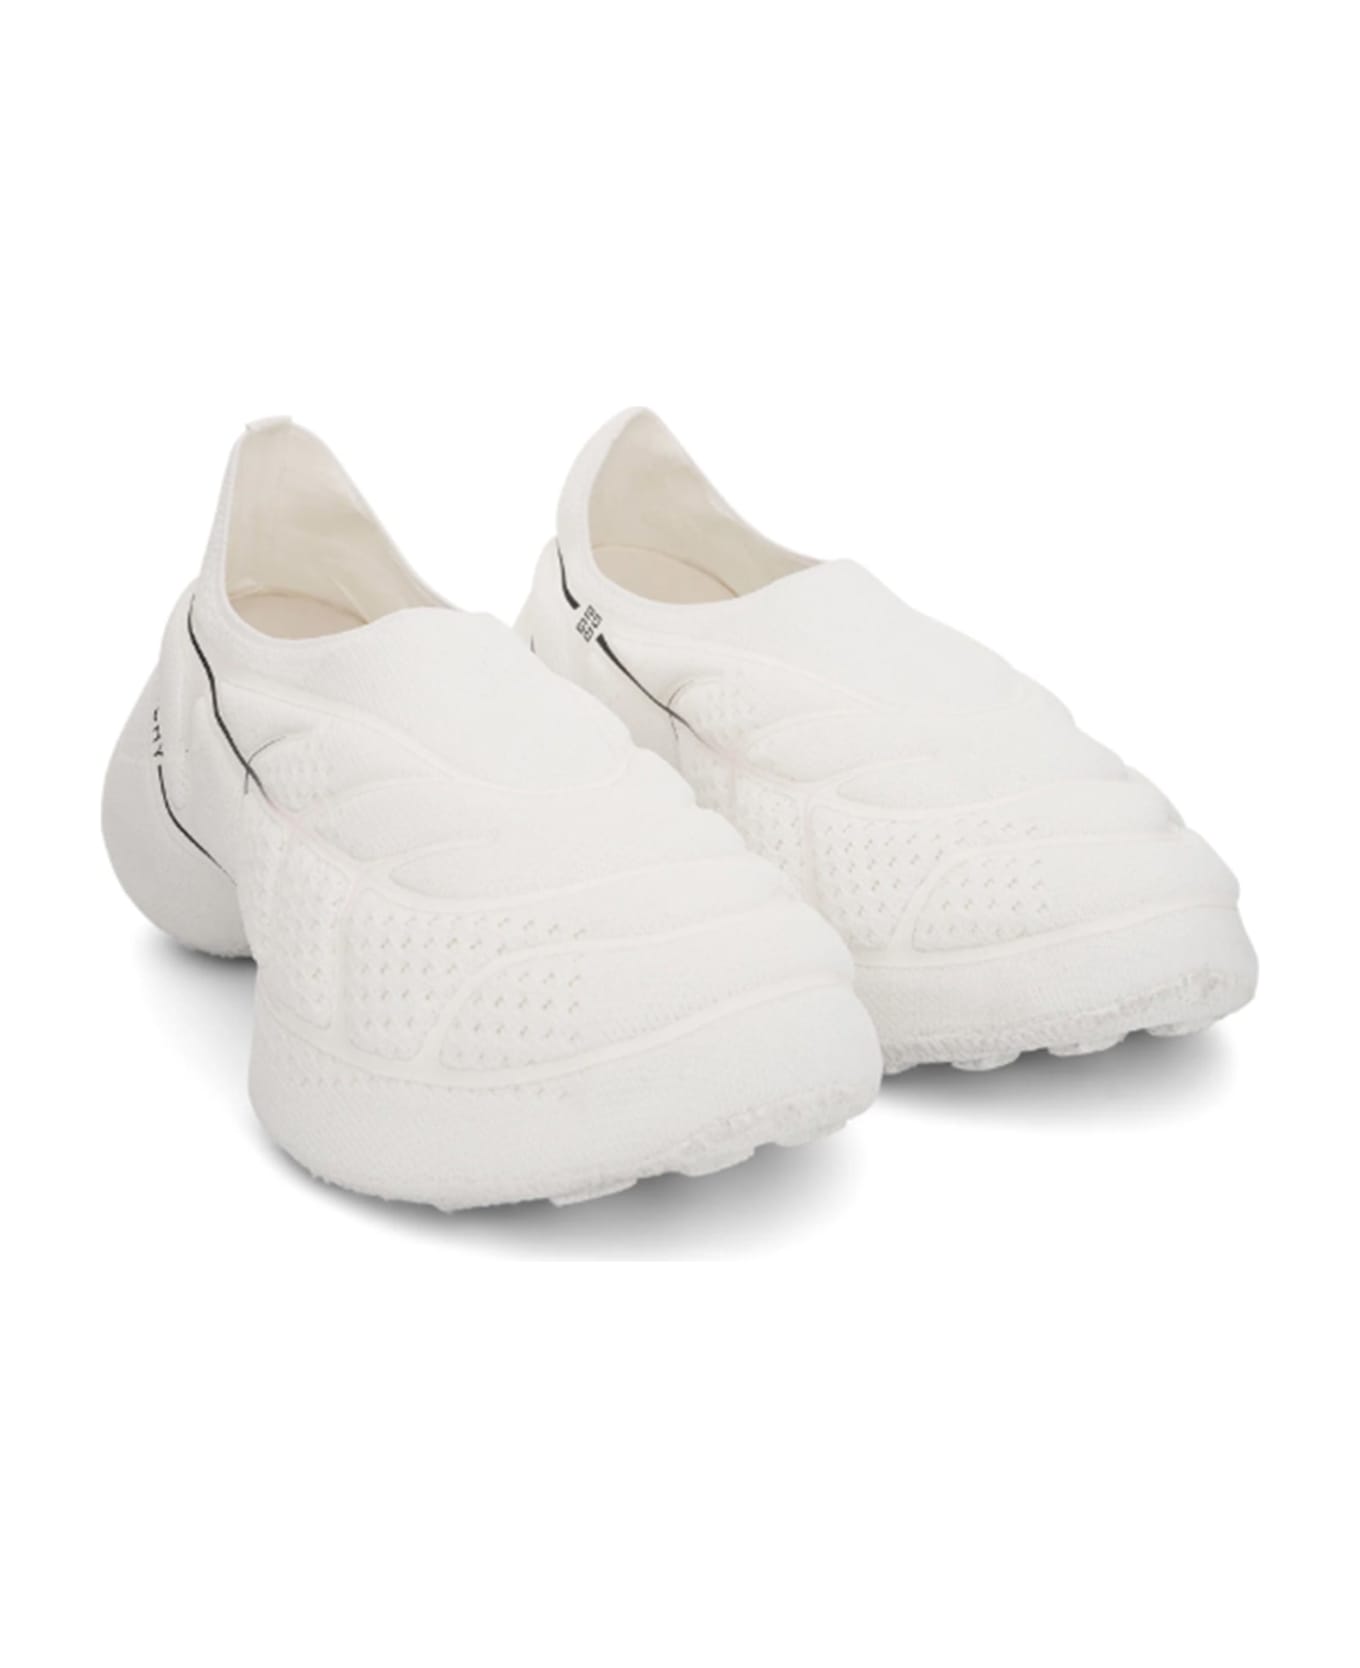 Givenchy Tk-360 Sneakers - White